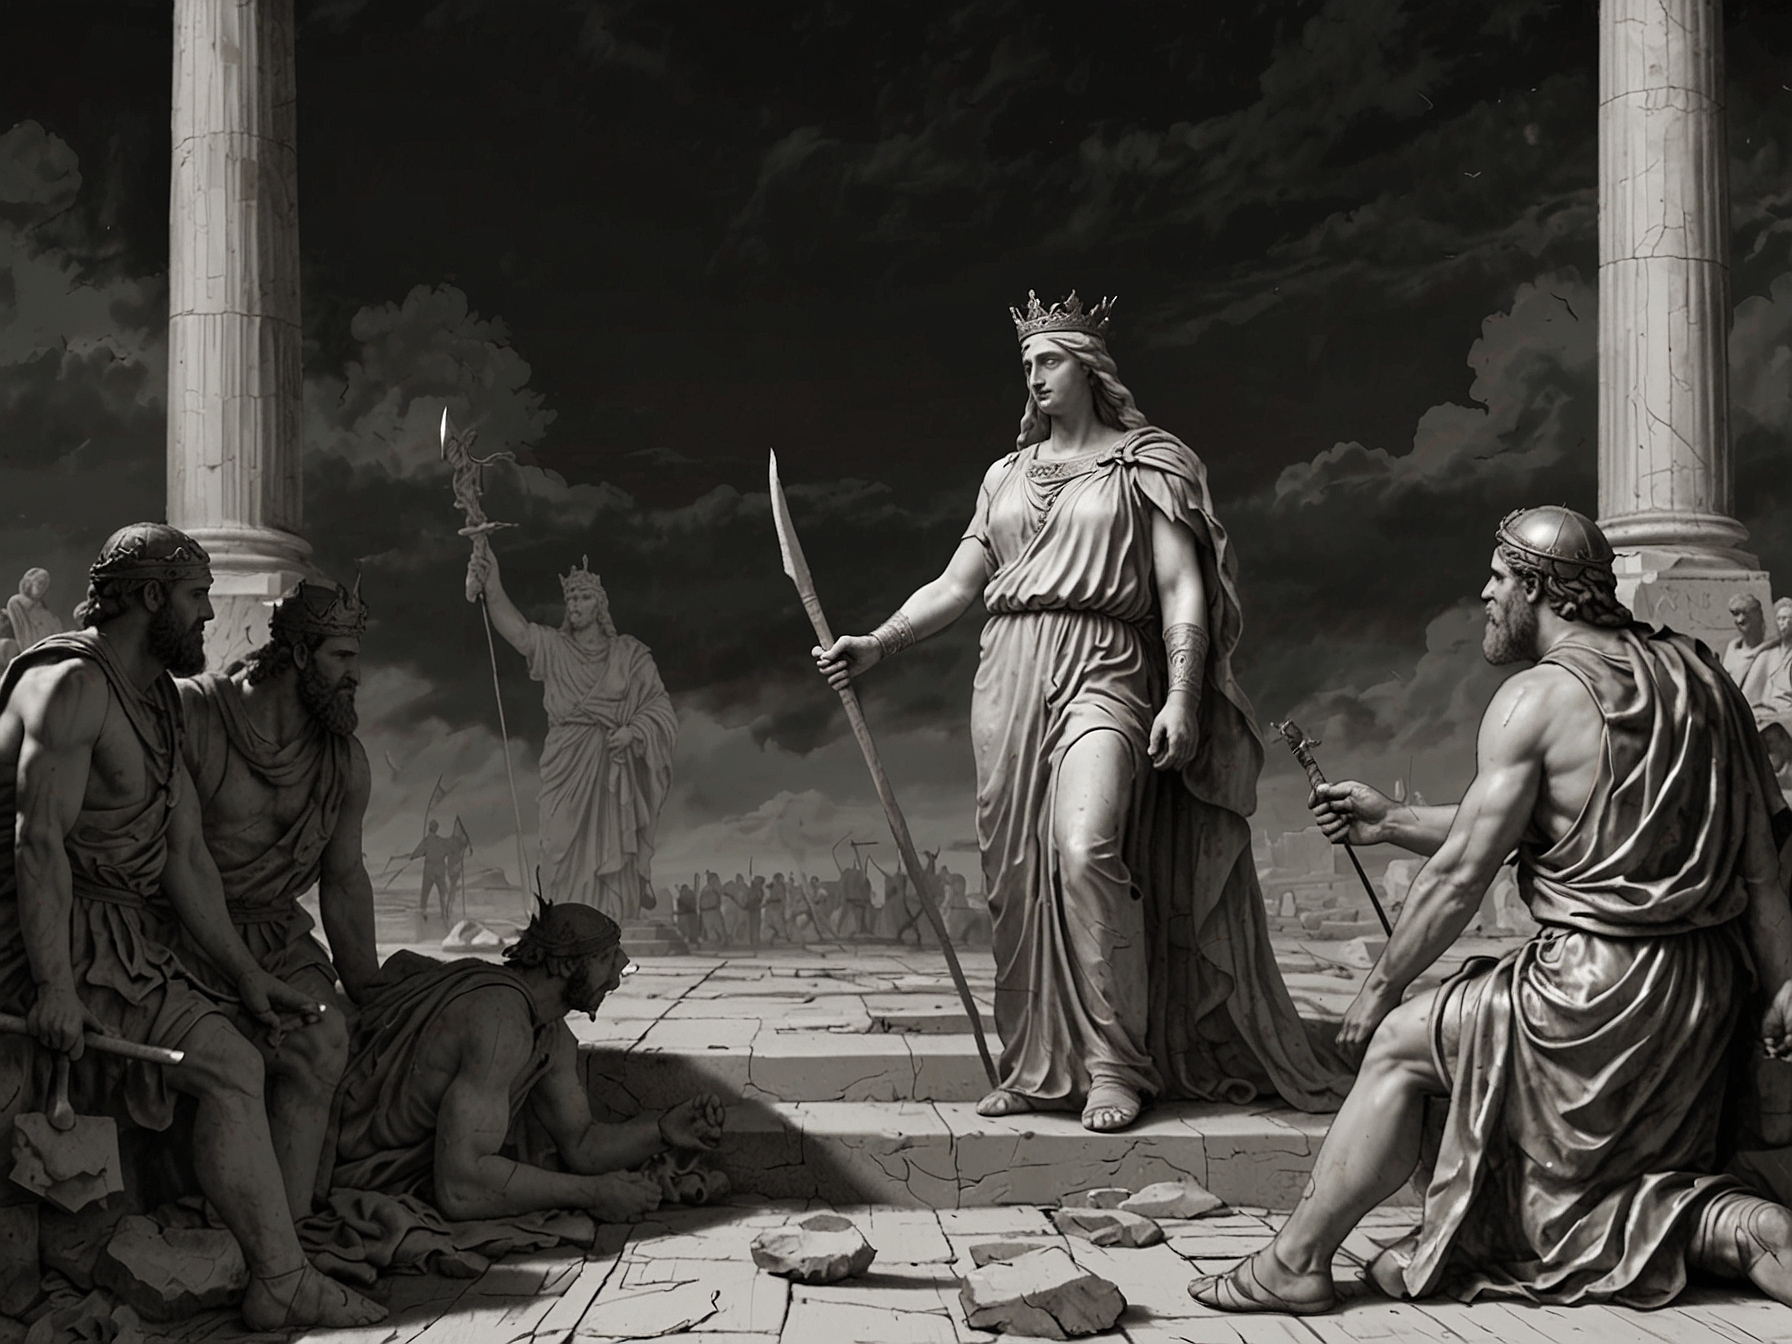 An illustration of Antigone defying King Creon to bury her brother, symbolizing the timeless conflict between moral duty and state laws, a theme echoed in modern political movements.